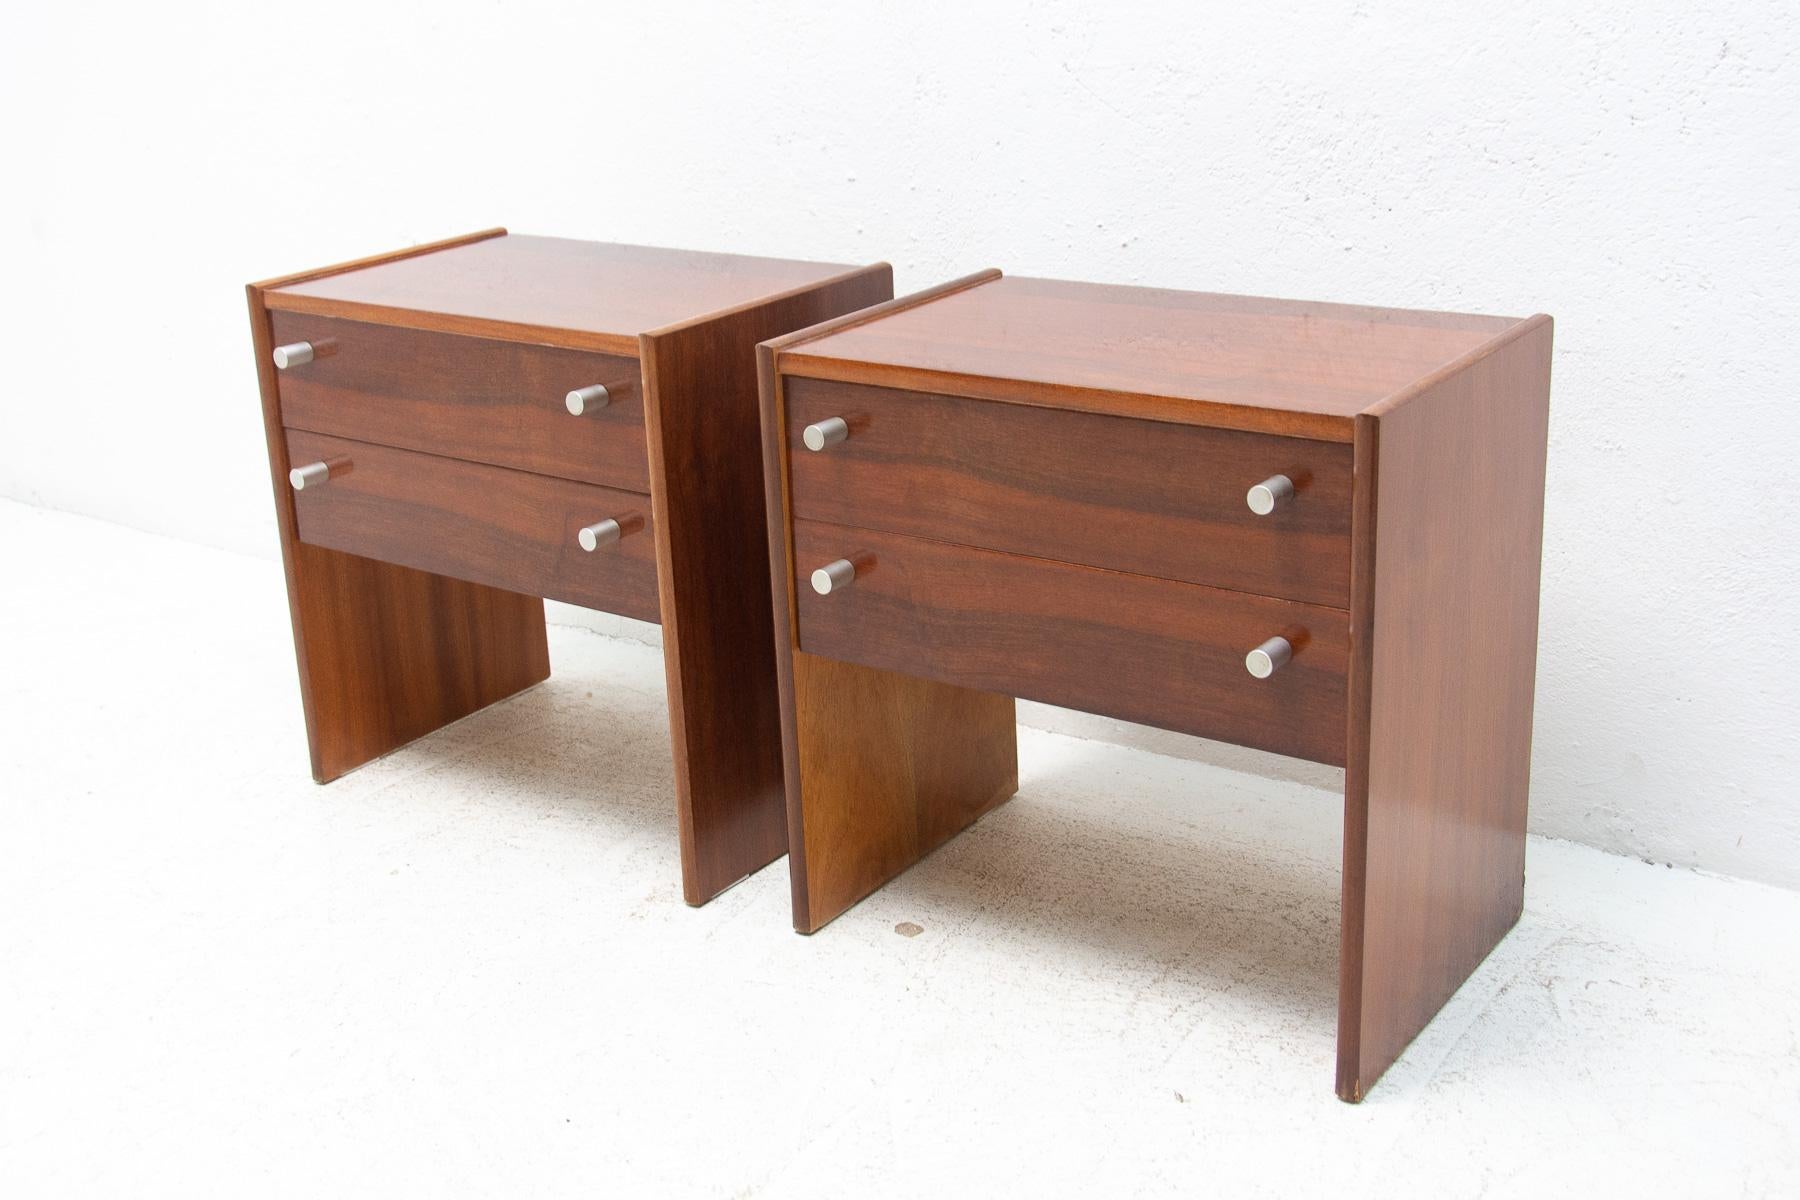 These Vintage ladies desks were made by UP Zavody company in the former Czechoslovakia in the 1980´s. Features a simple design, mahogany veneer. Overall in very good Vintage condition. Price is for the pair.

Measures: Height: 50 cm

width: 50